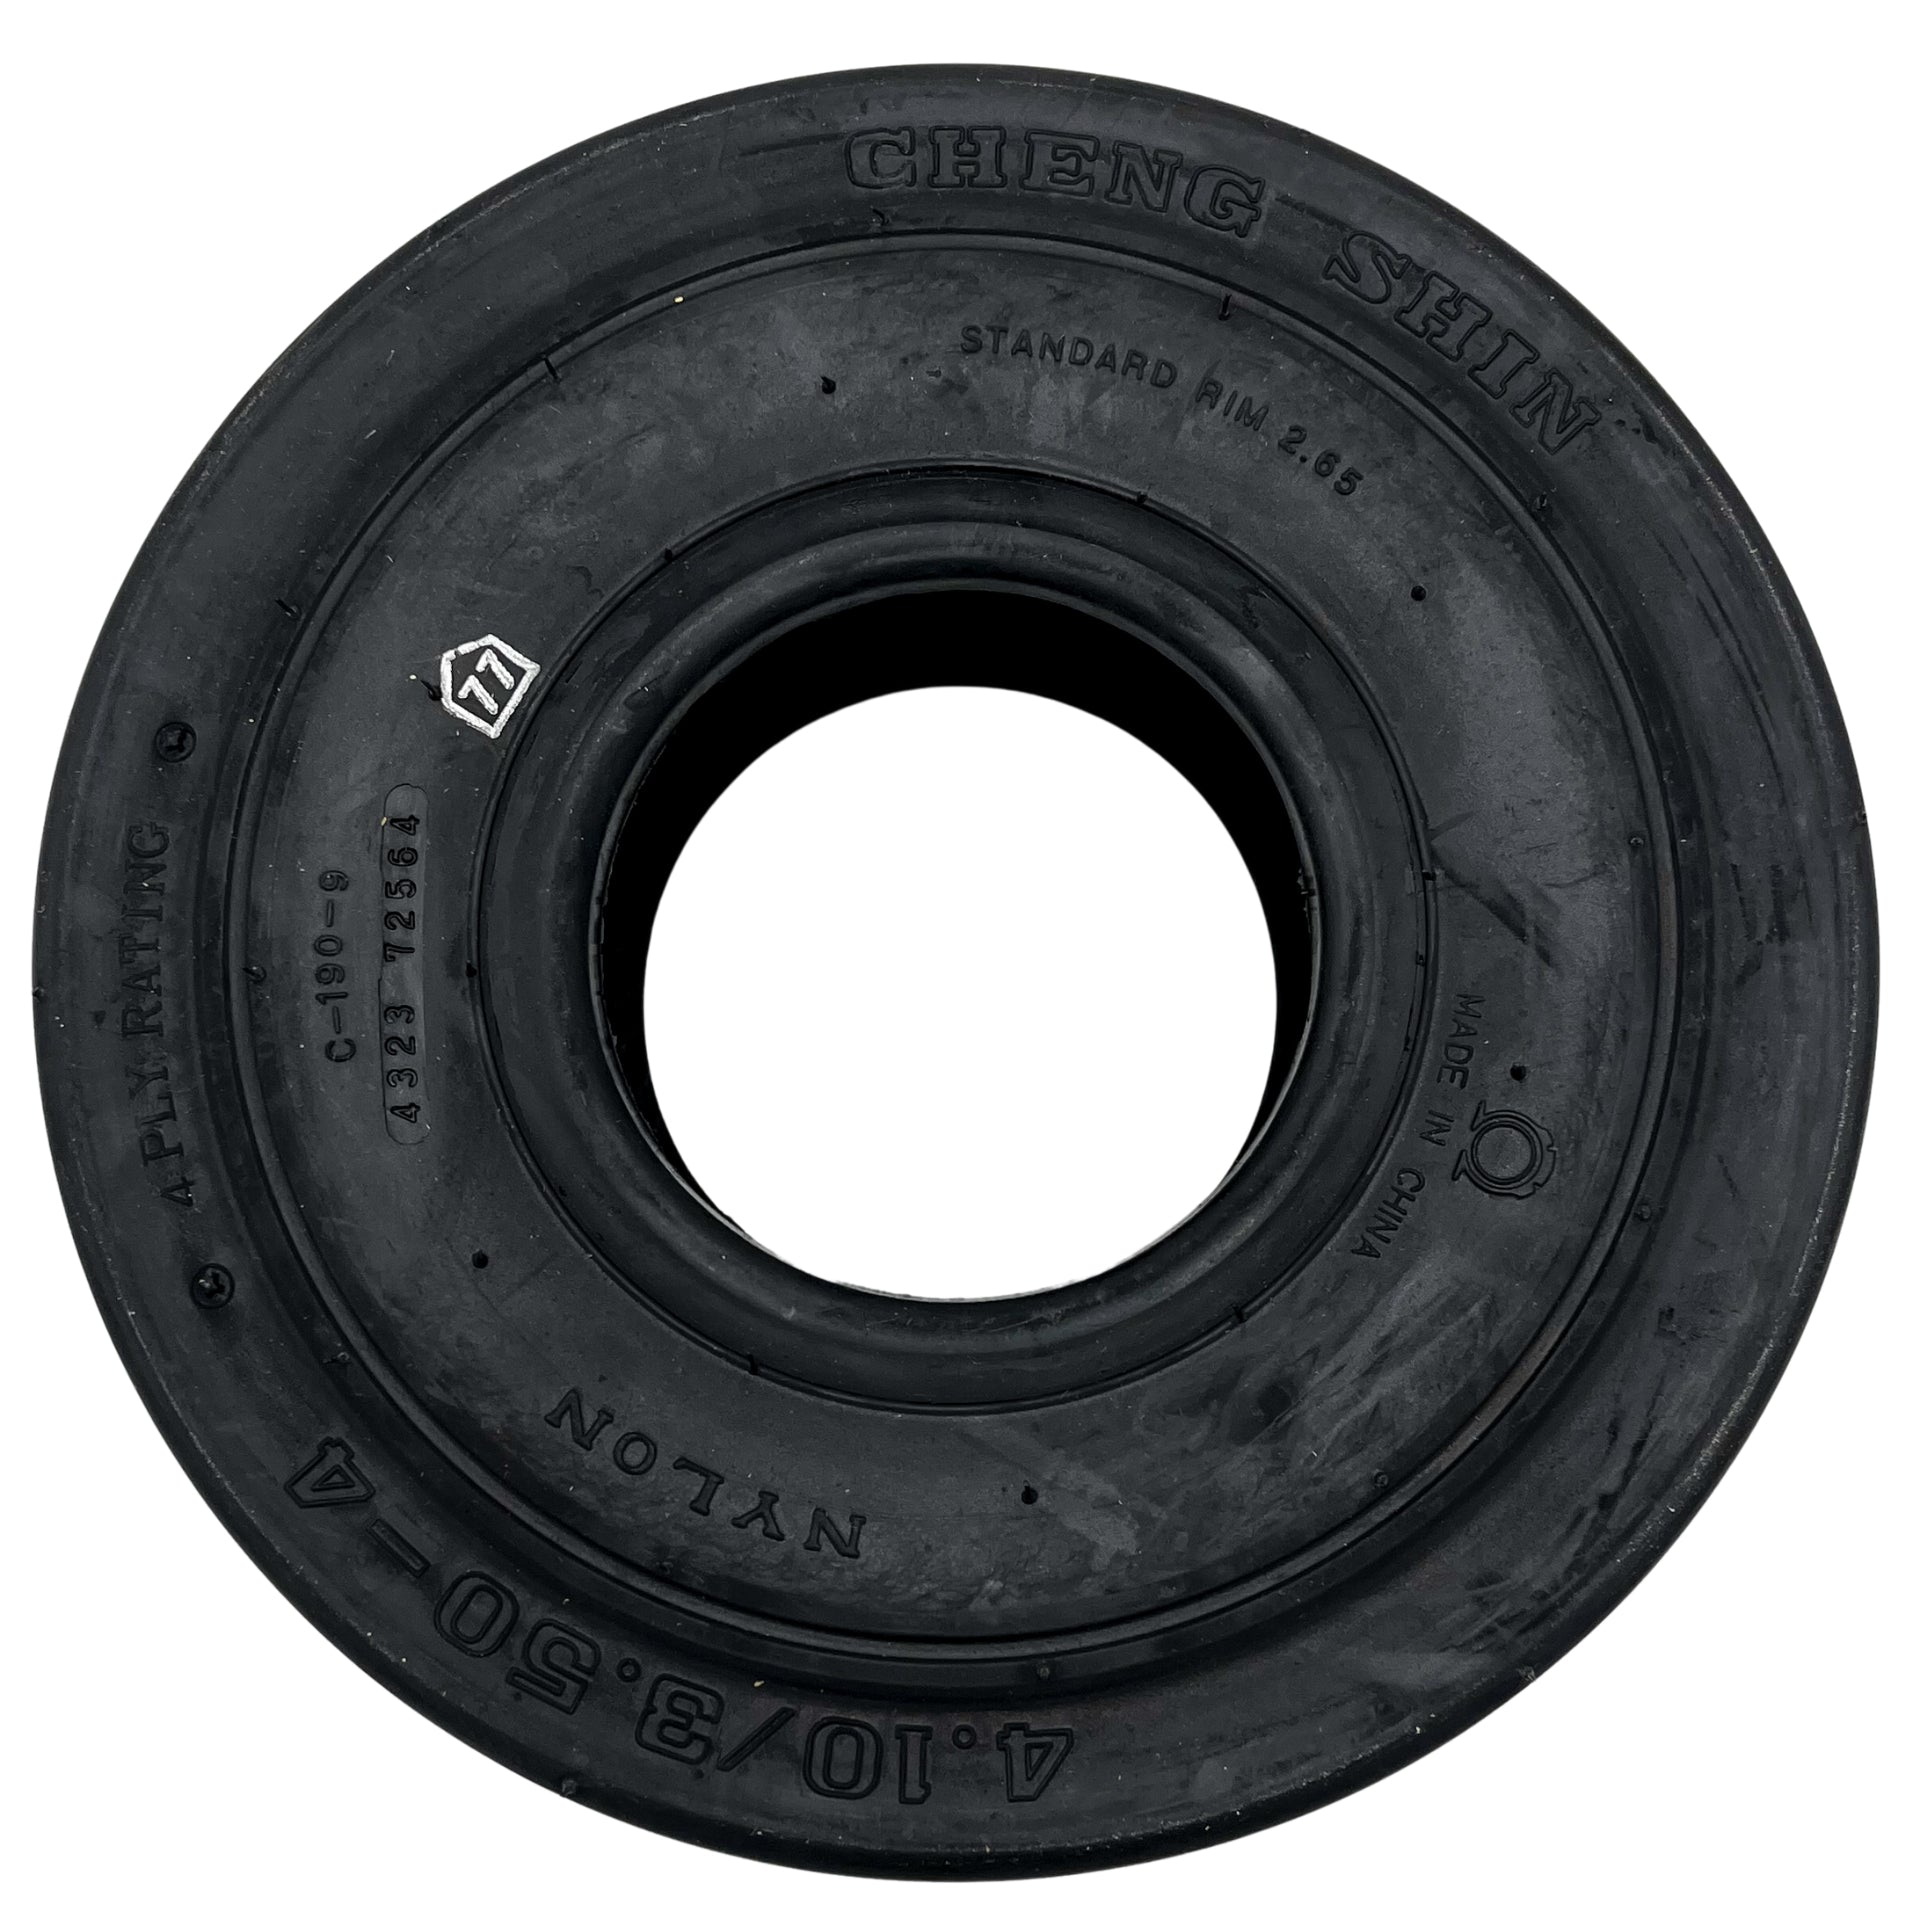 4.10x3.50-4 Smooth Tread Caster Wheel Tire (Tire Only)